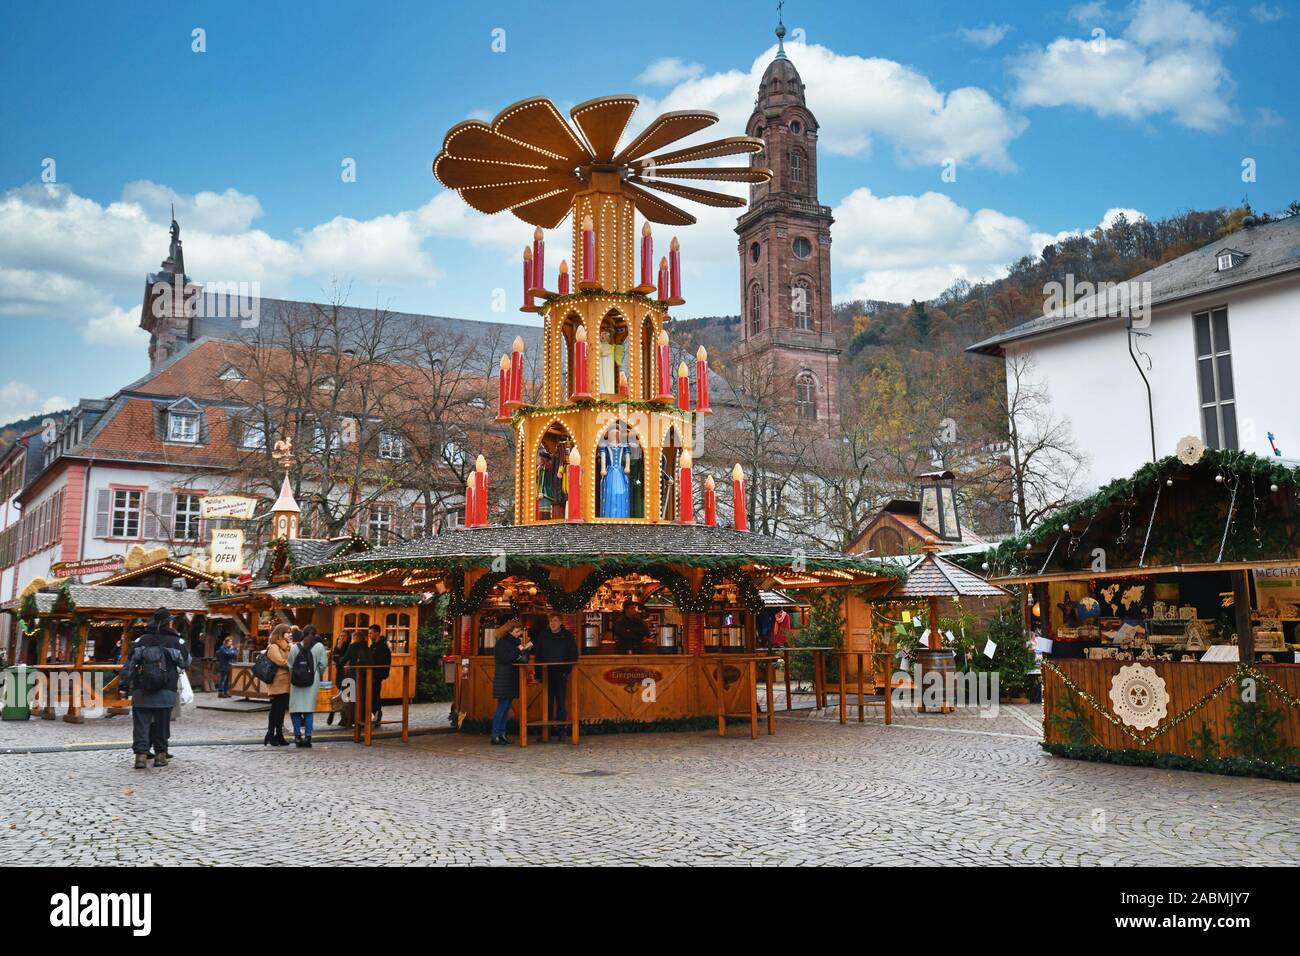 Heidelberg, Germany - September 2019: Massive holiday pyramid with candles as part of traditional Christmas market on universiry square in city Stock Photo